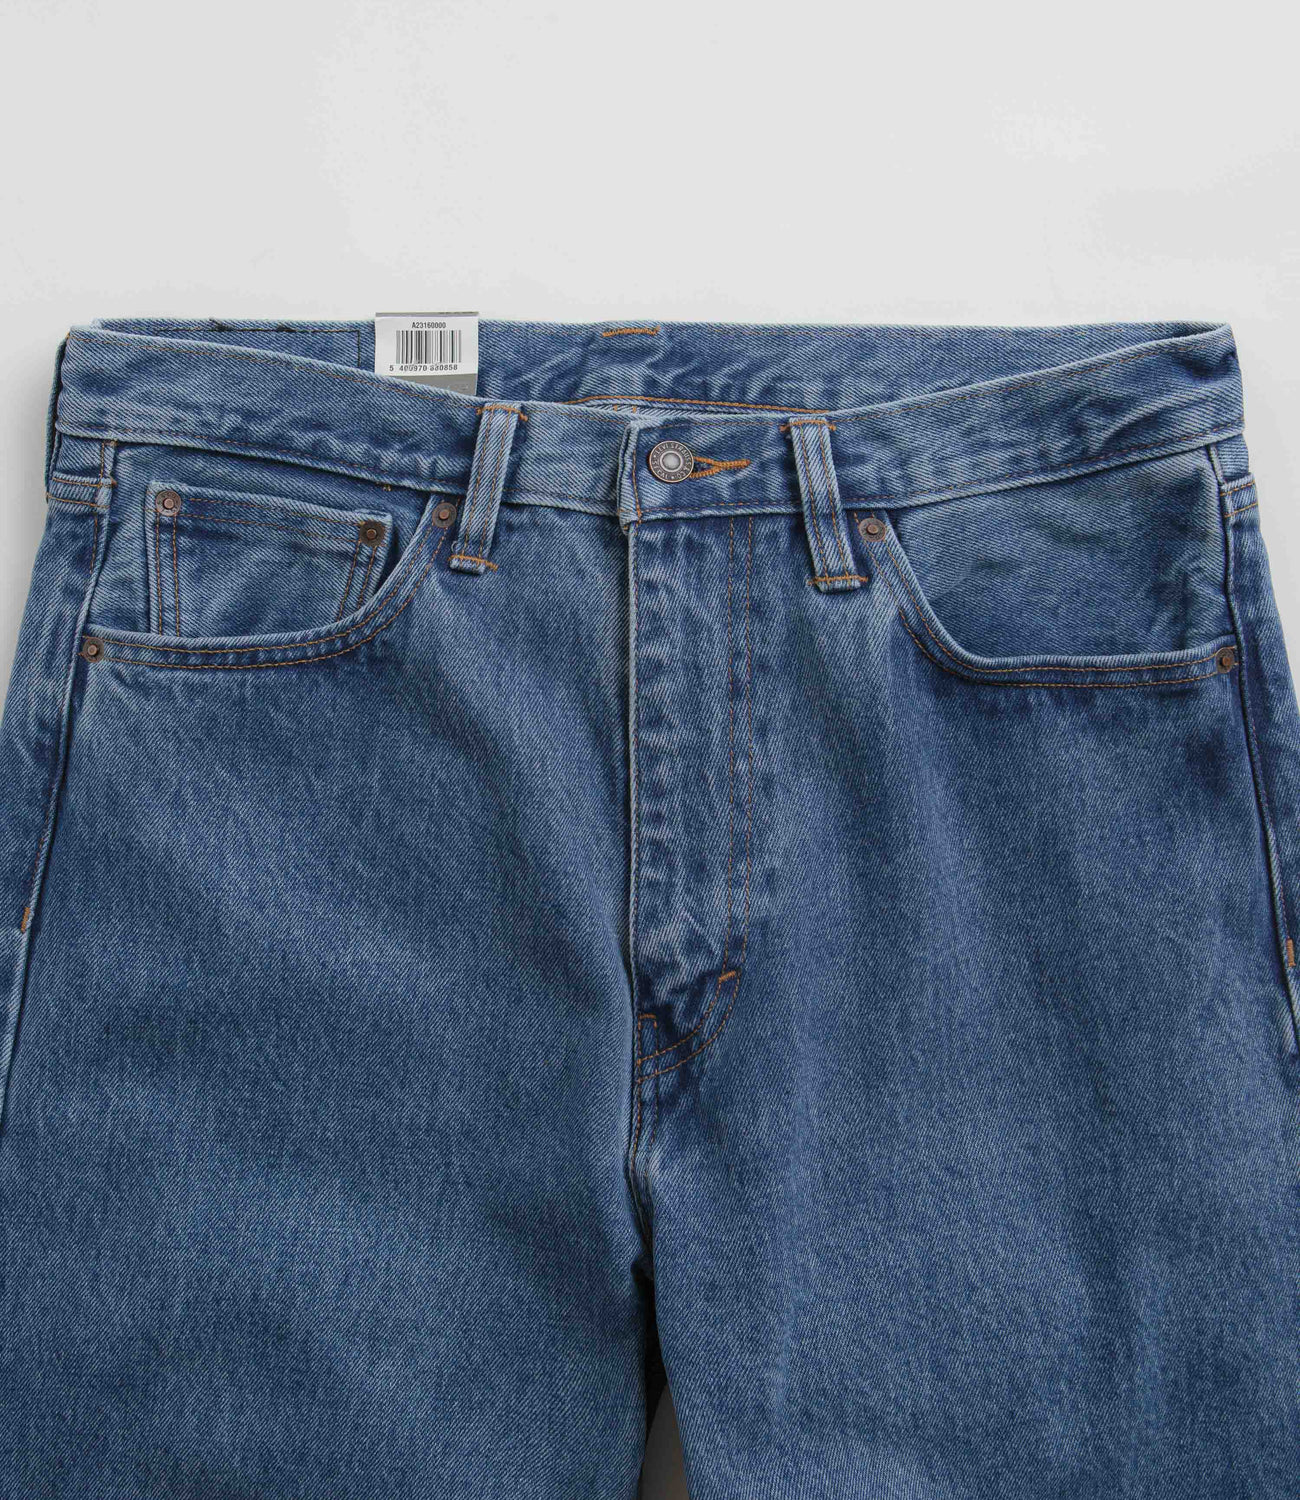 Levi's® Skate Baggy 5 Pocket Jeans - Deep Groove - is the perfect